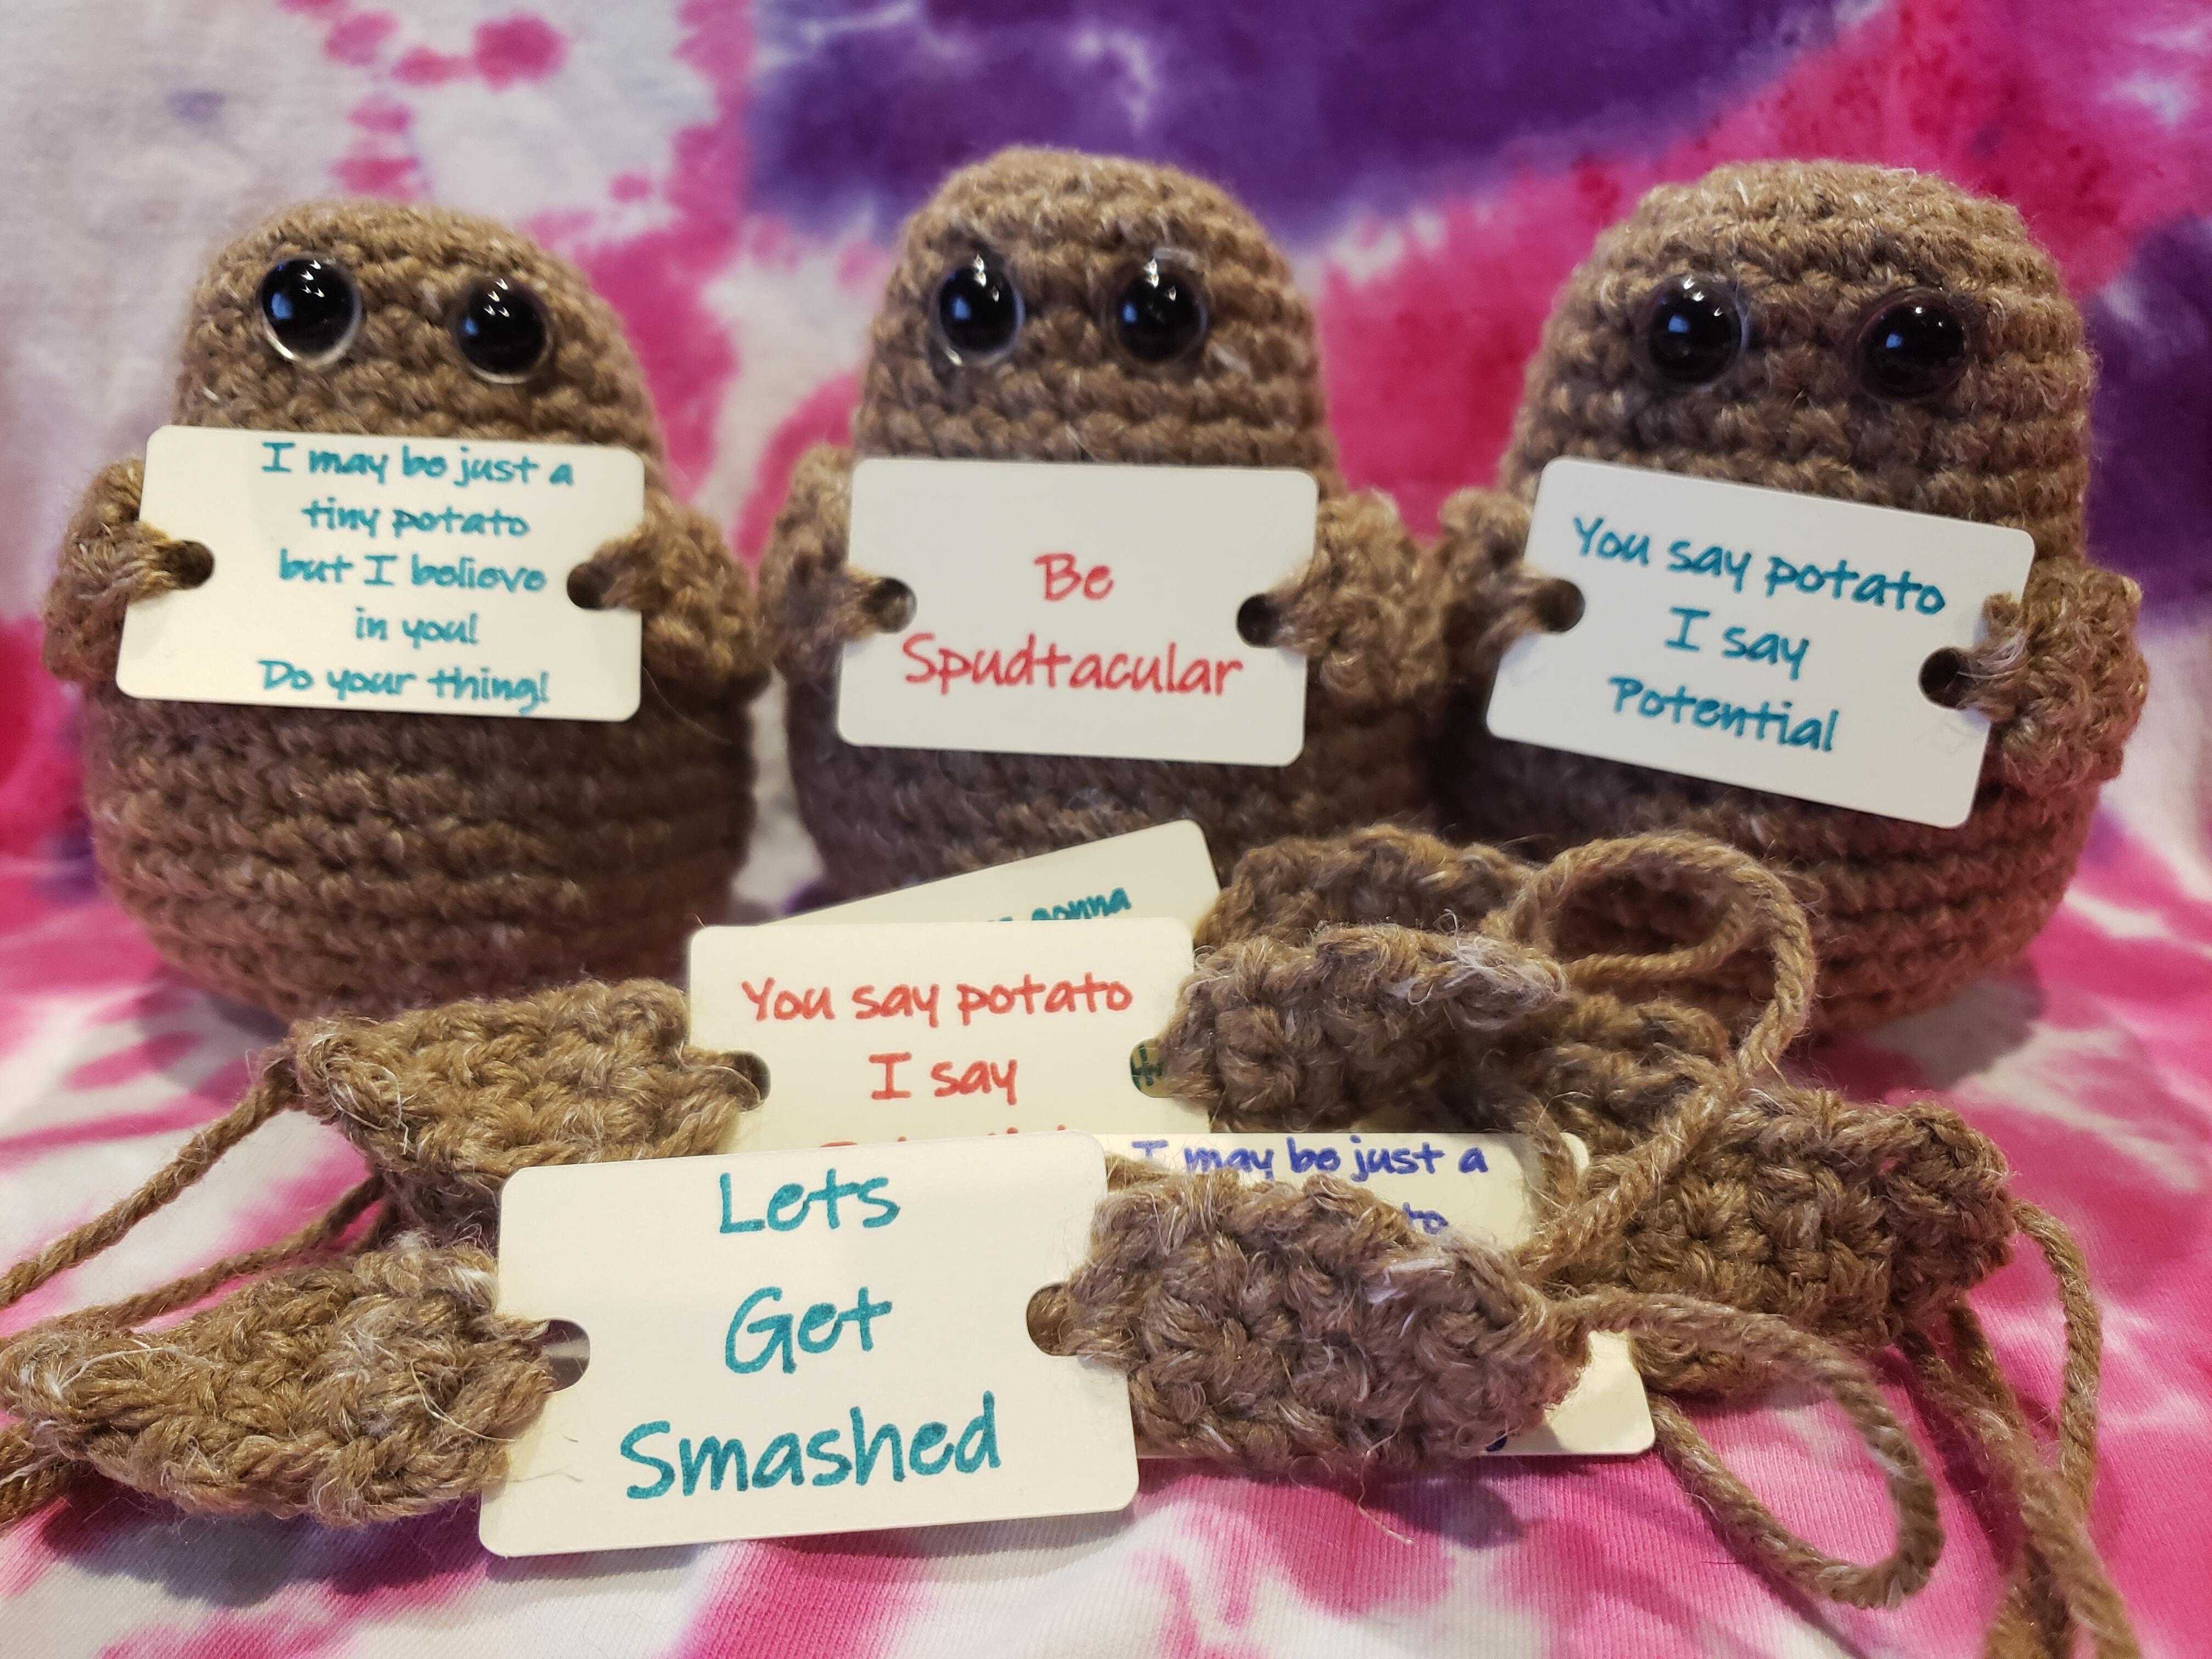 Mini Positive Potatoes with Positive Card Knitting Inspired Toy  Inspirational Crochet Dolls Home Room Party Decoration